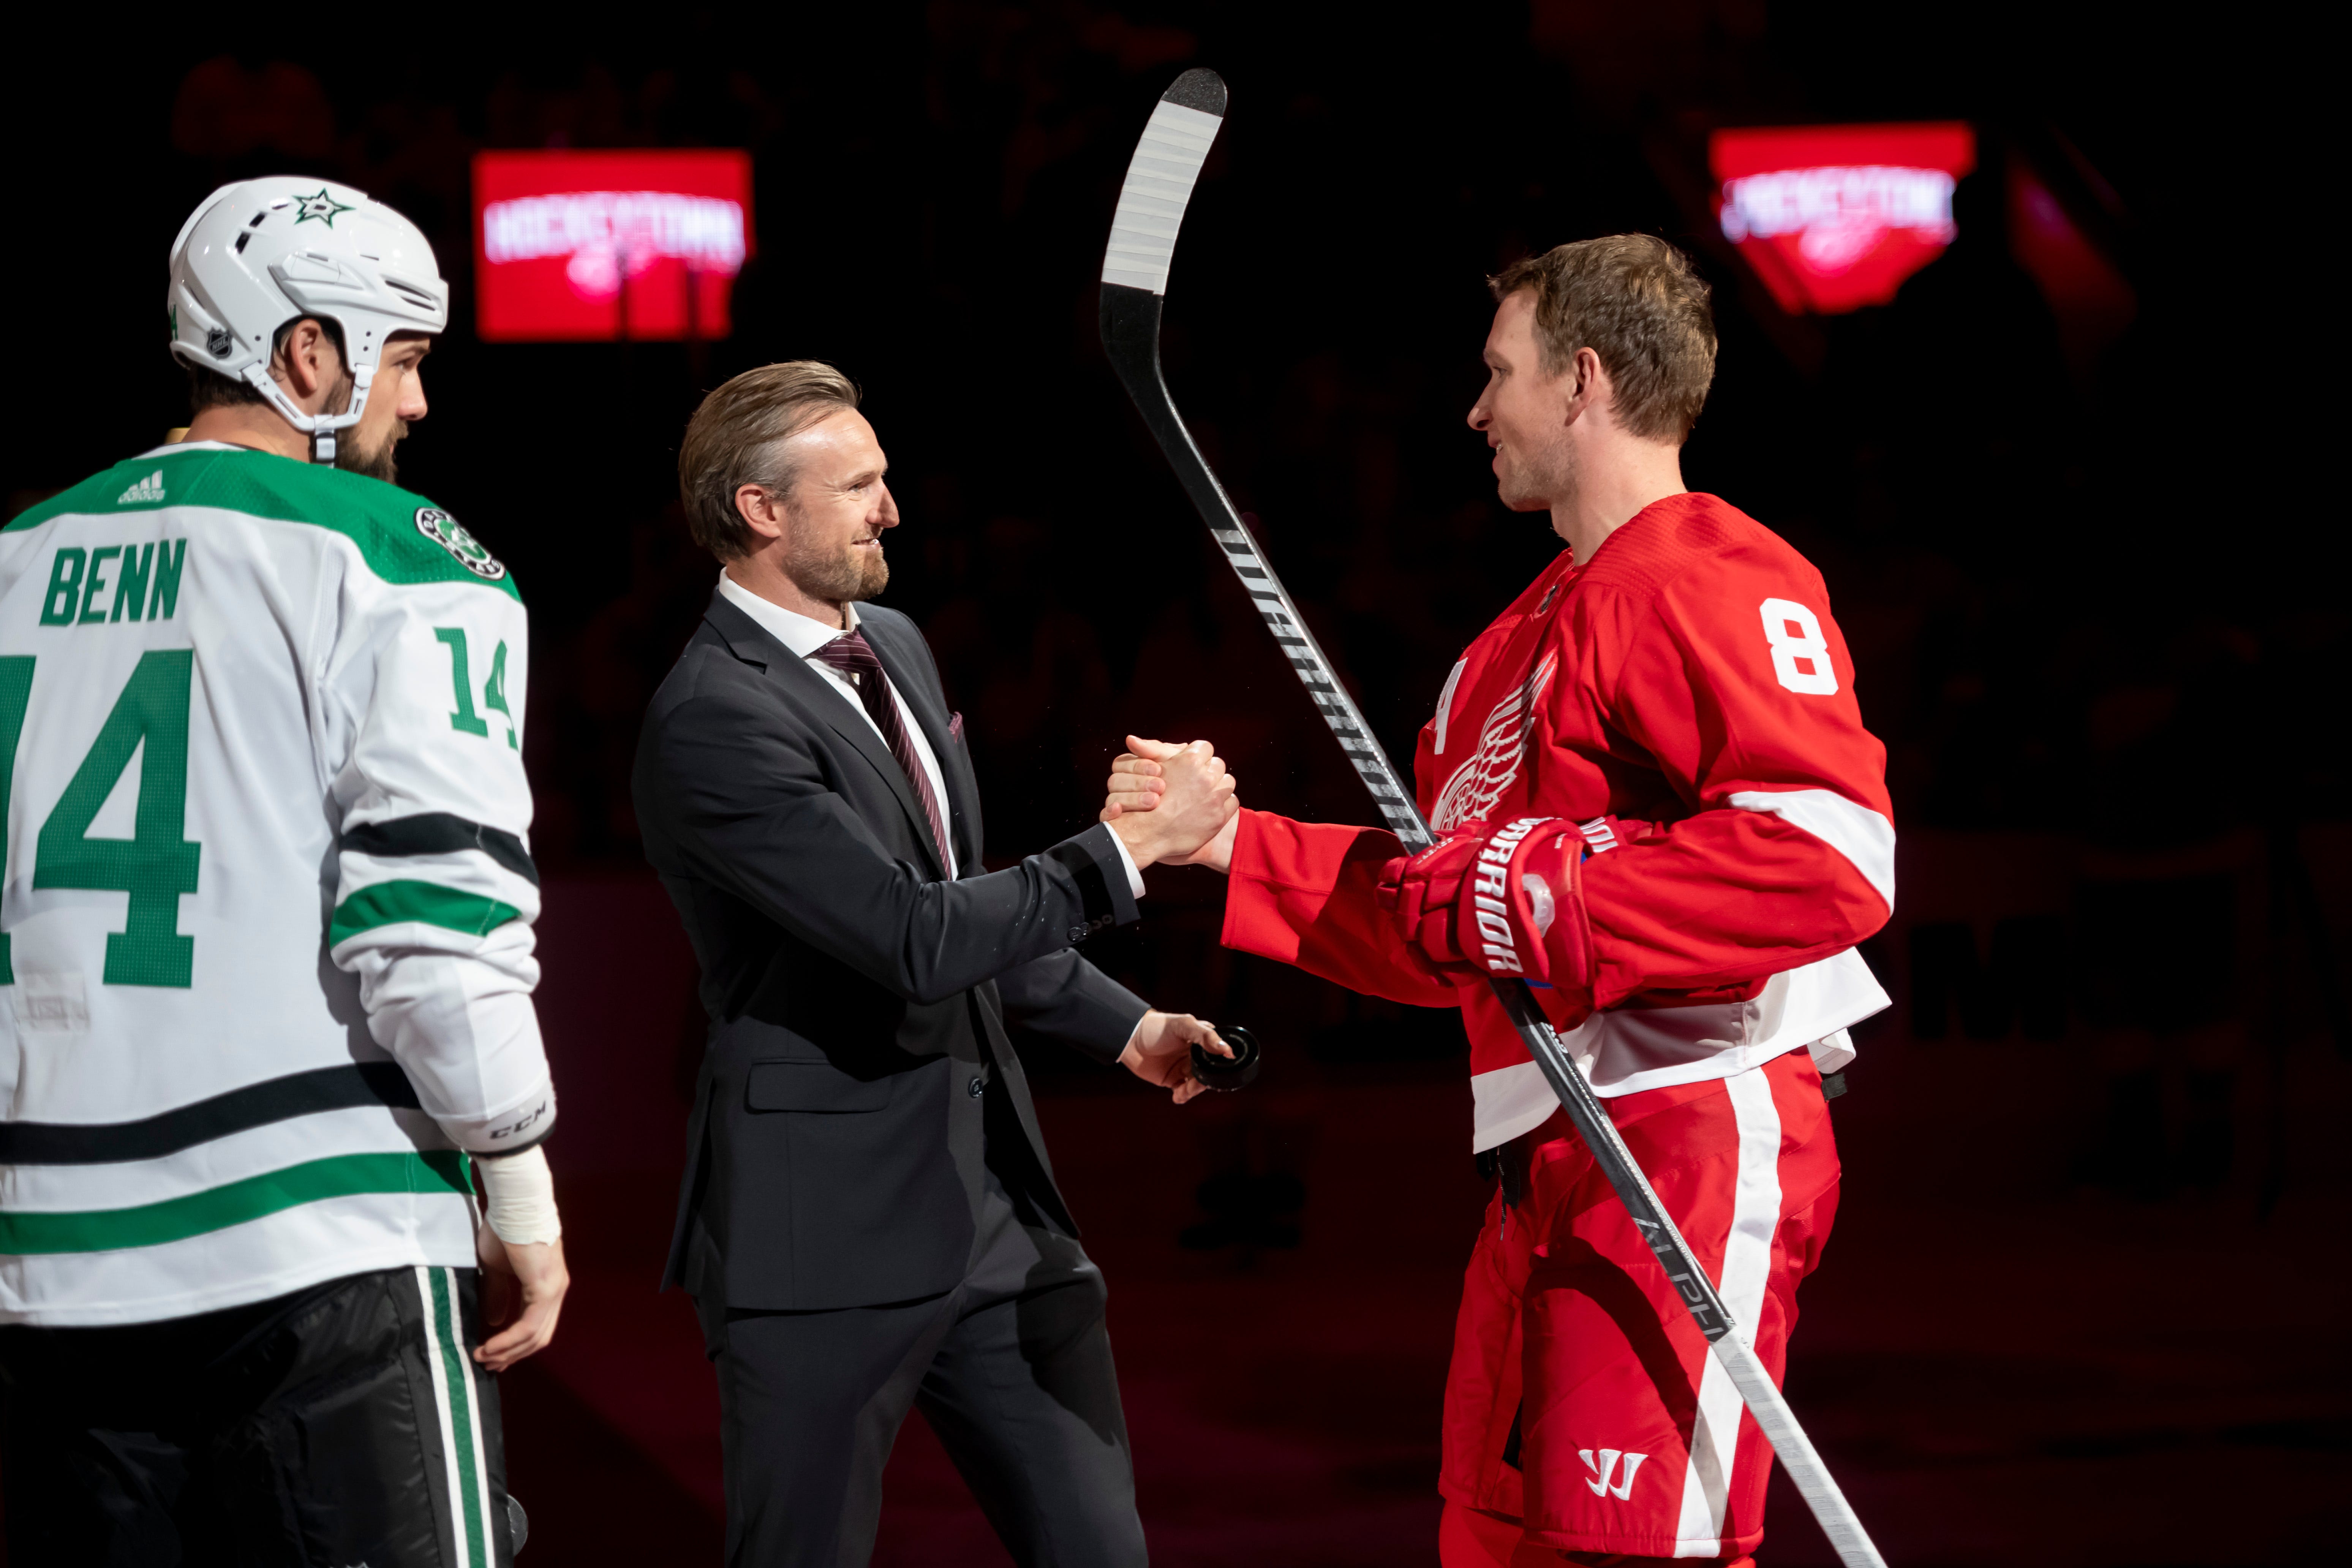 Former Red Wings defenseman Nicklas Kronwall shakes hands with Detroit left wing Justin Abdelkader after a ceremonial puck drop before the start of the game.